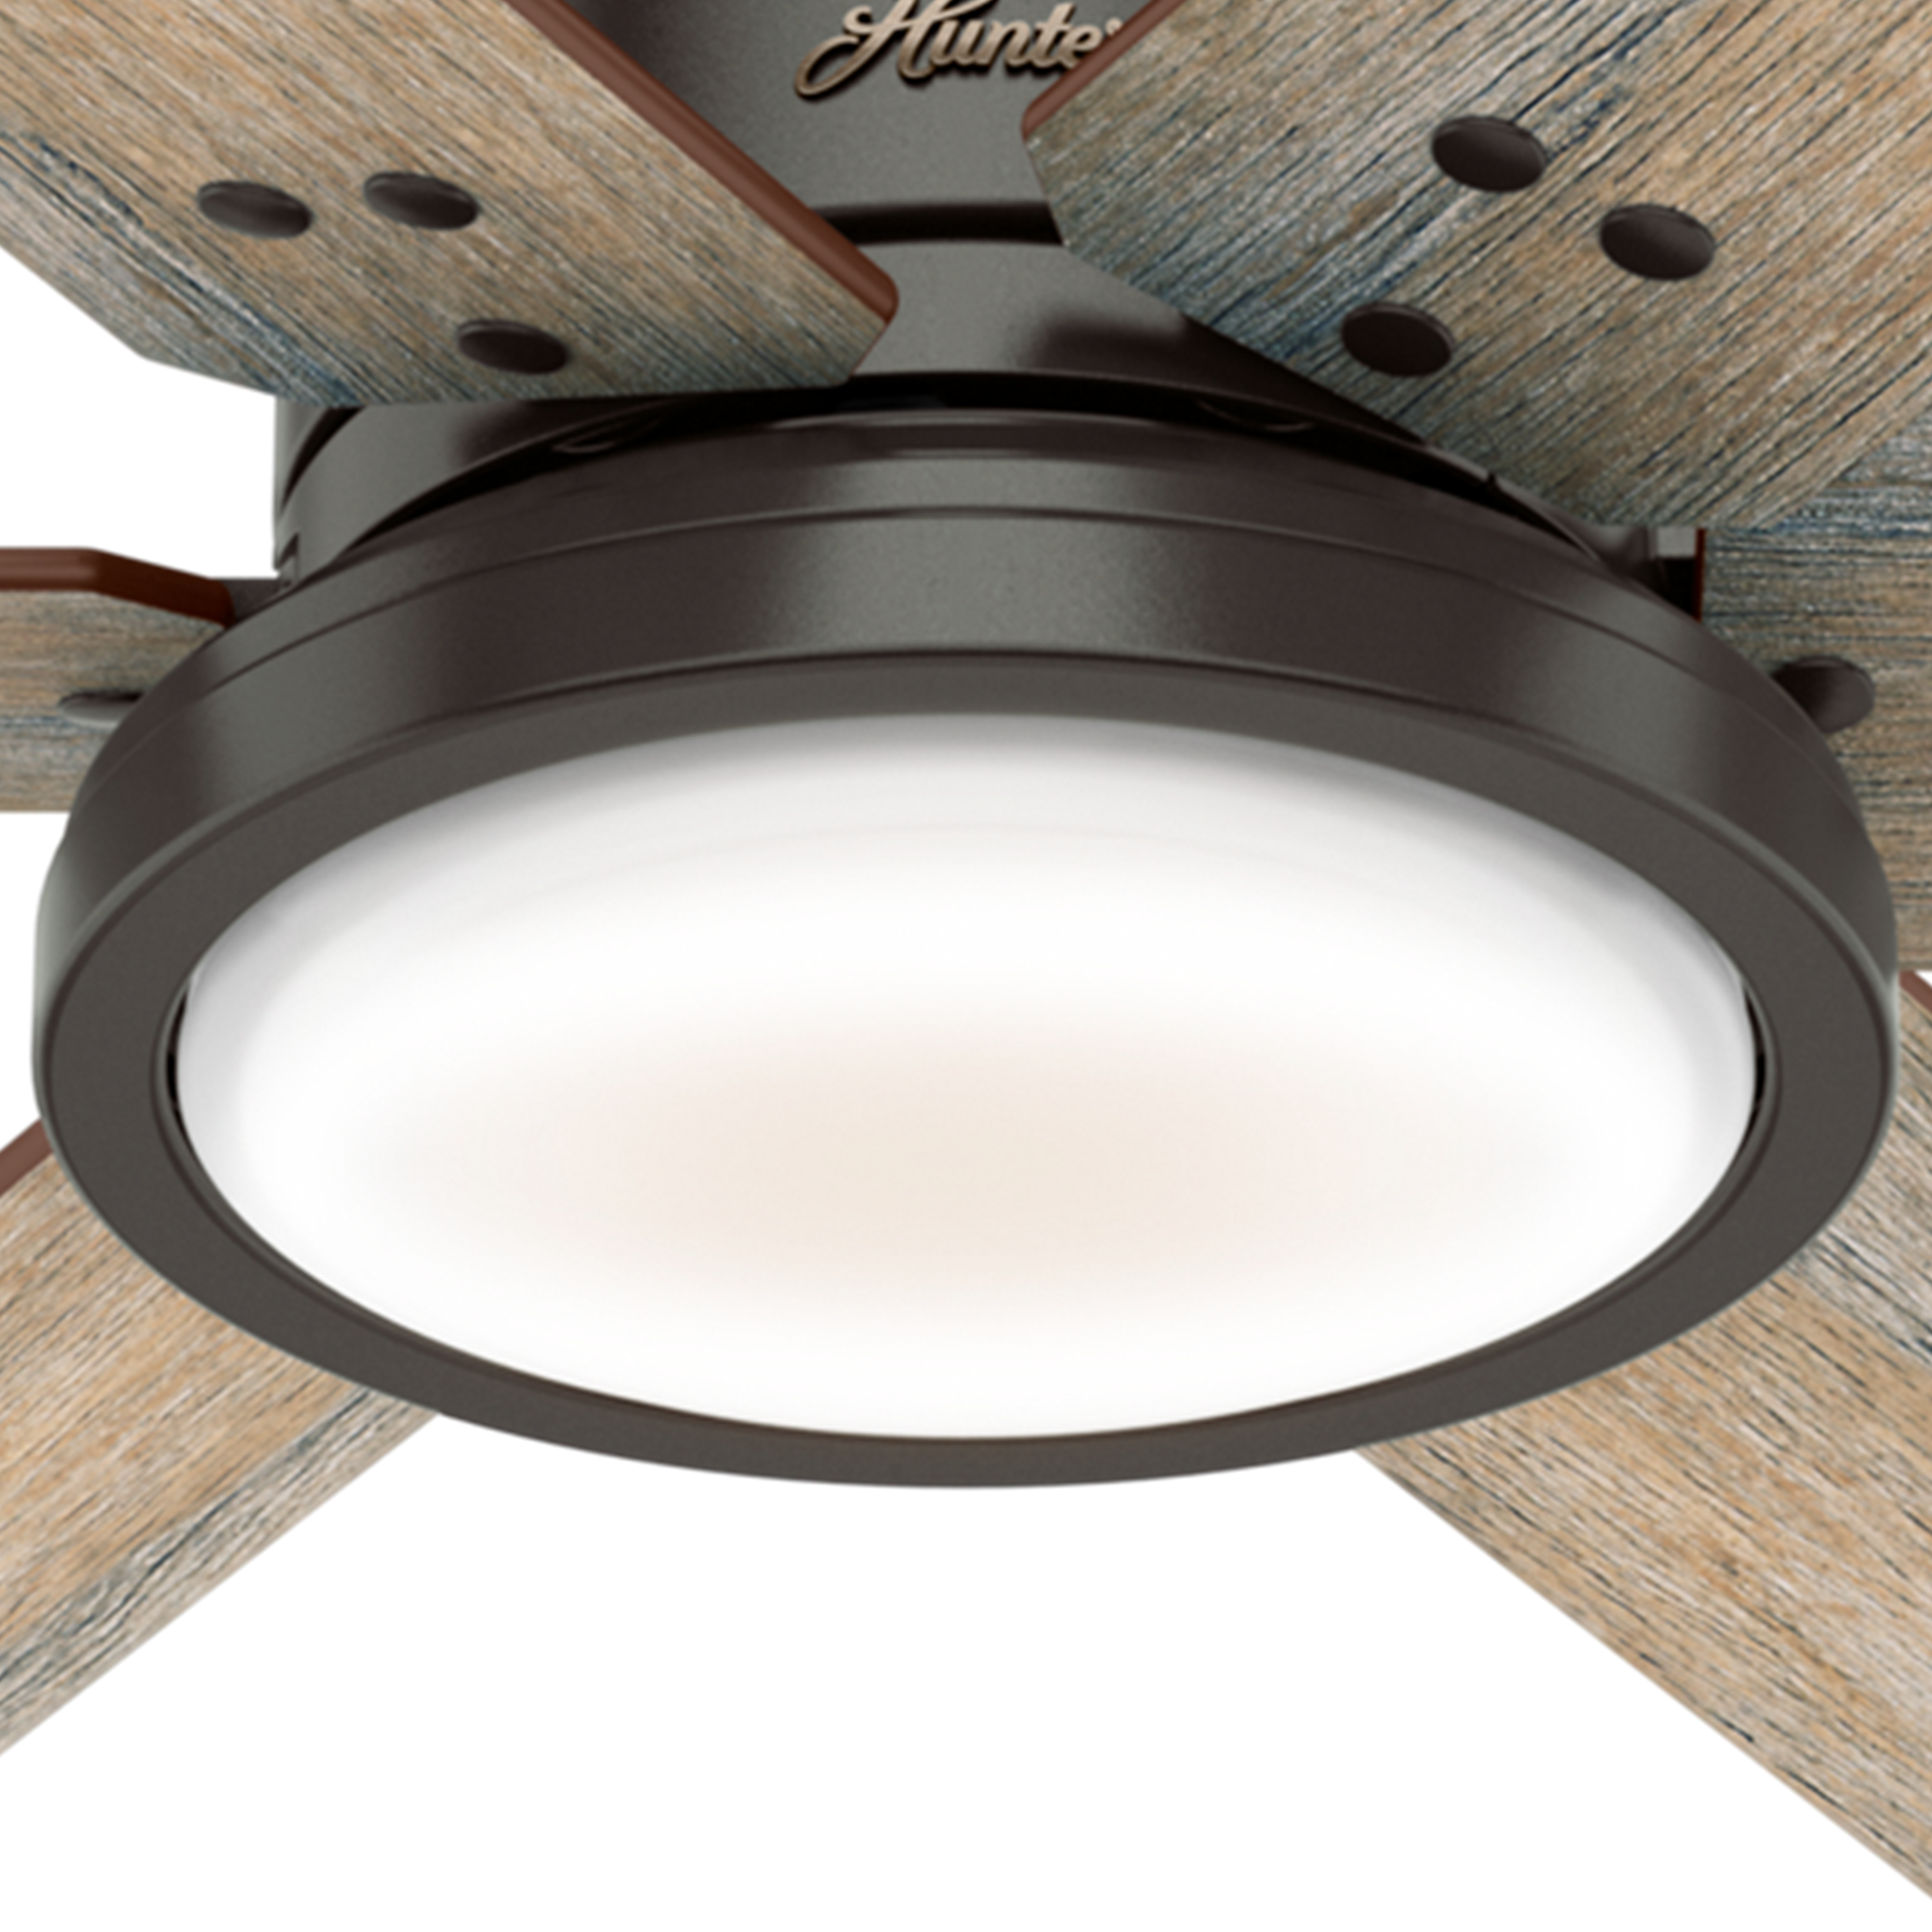 Hunter 70 inch Warrant Ceiling Fan with LED Light Kit and Wall Control Ceiling Fan Hunter Noble Bronze Barnwood / Drifted Oak Painted Cased White